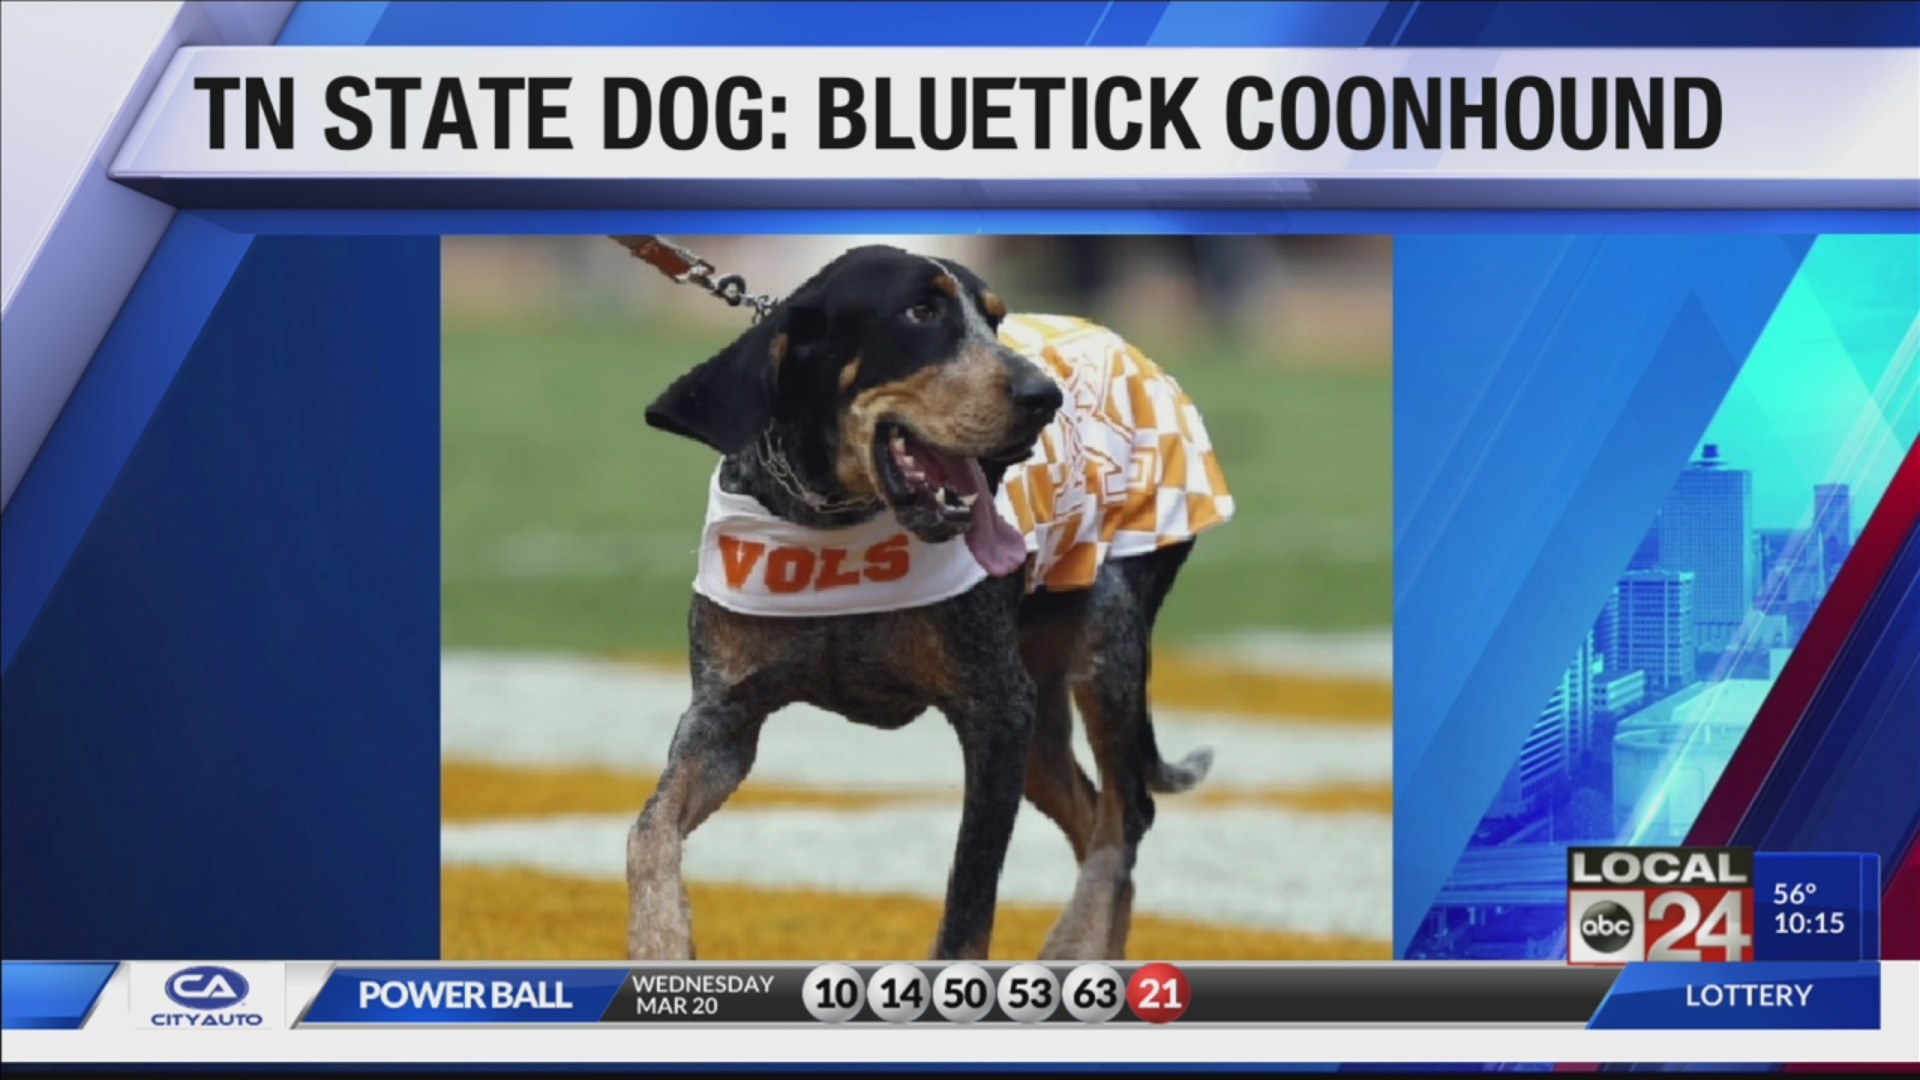 The Bluetick Coonhound Is Officially Tennessee’s State Dog